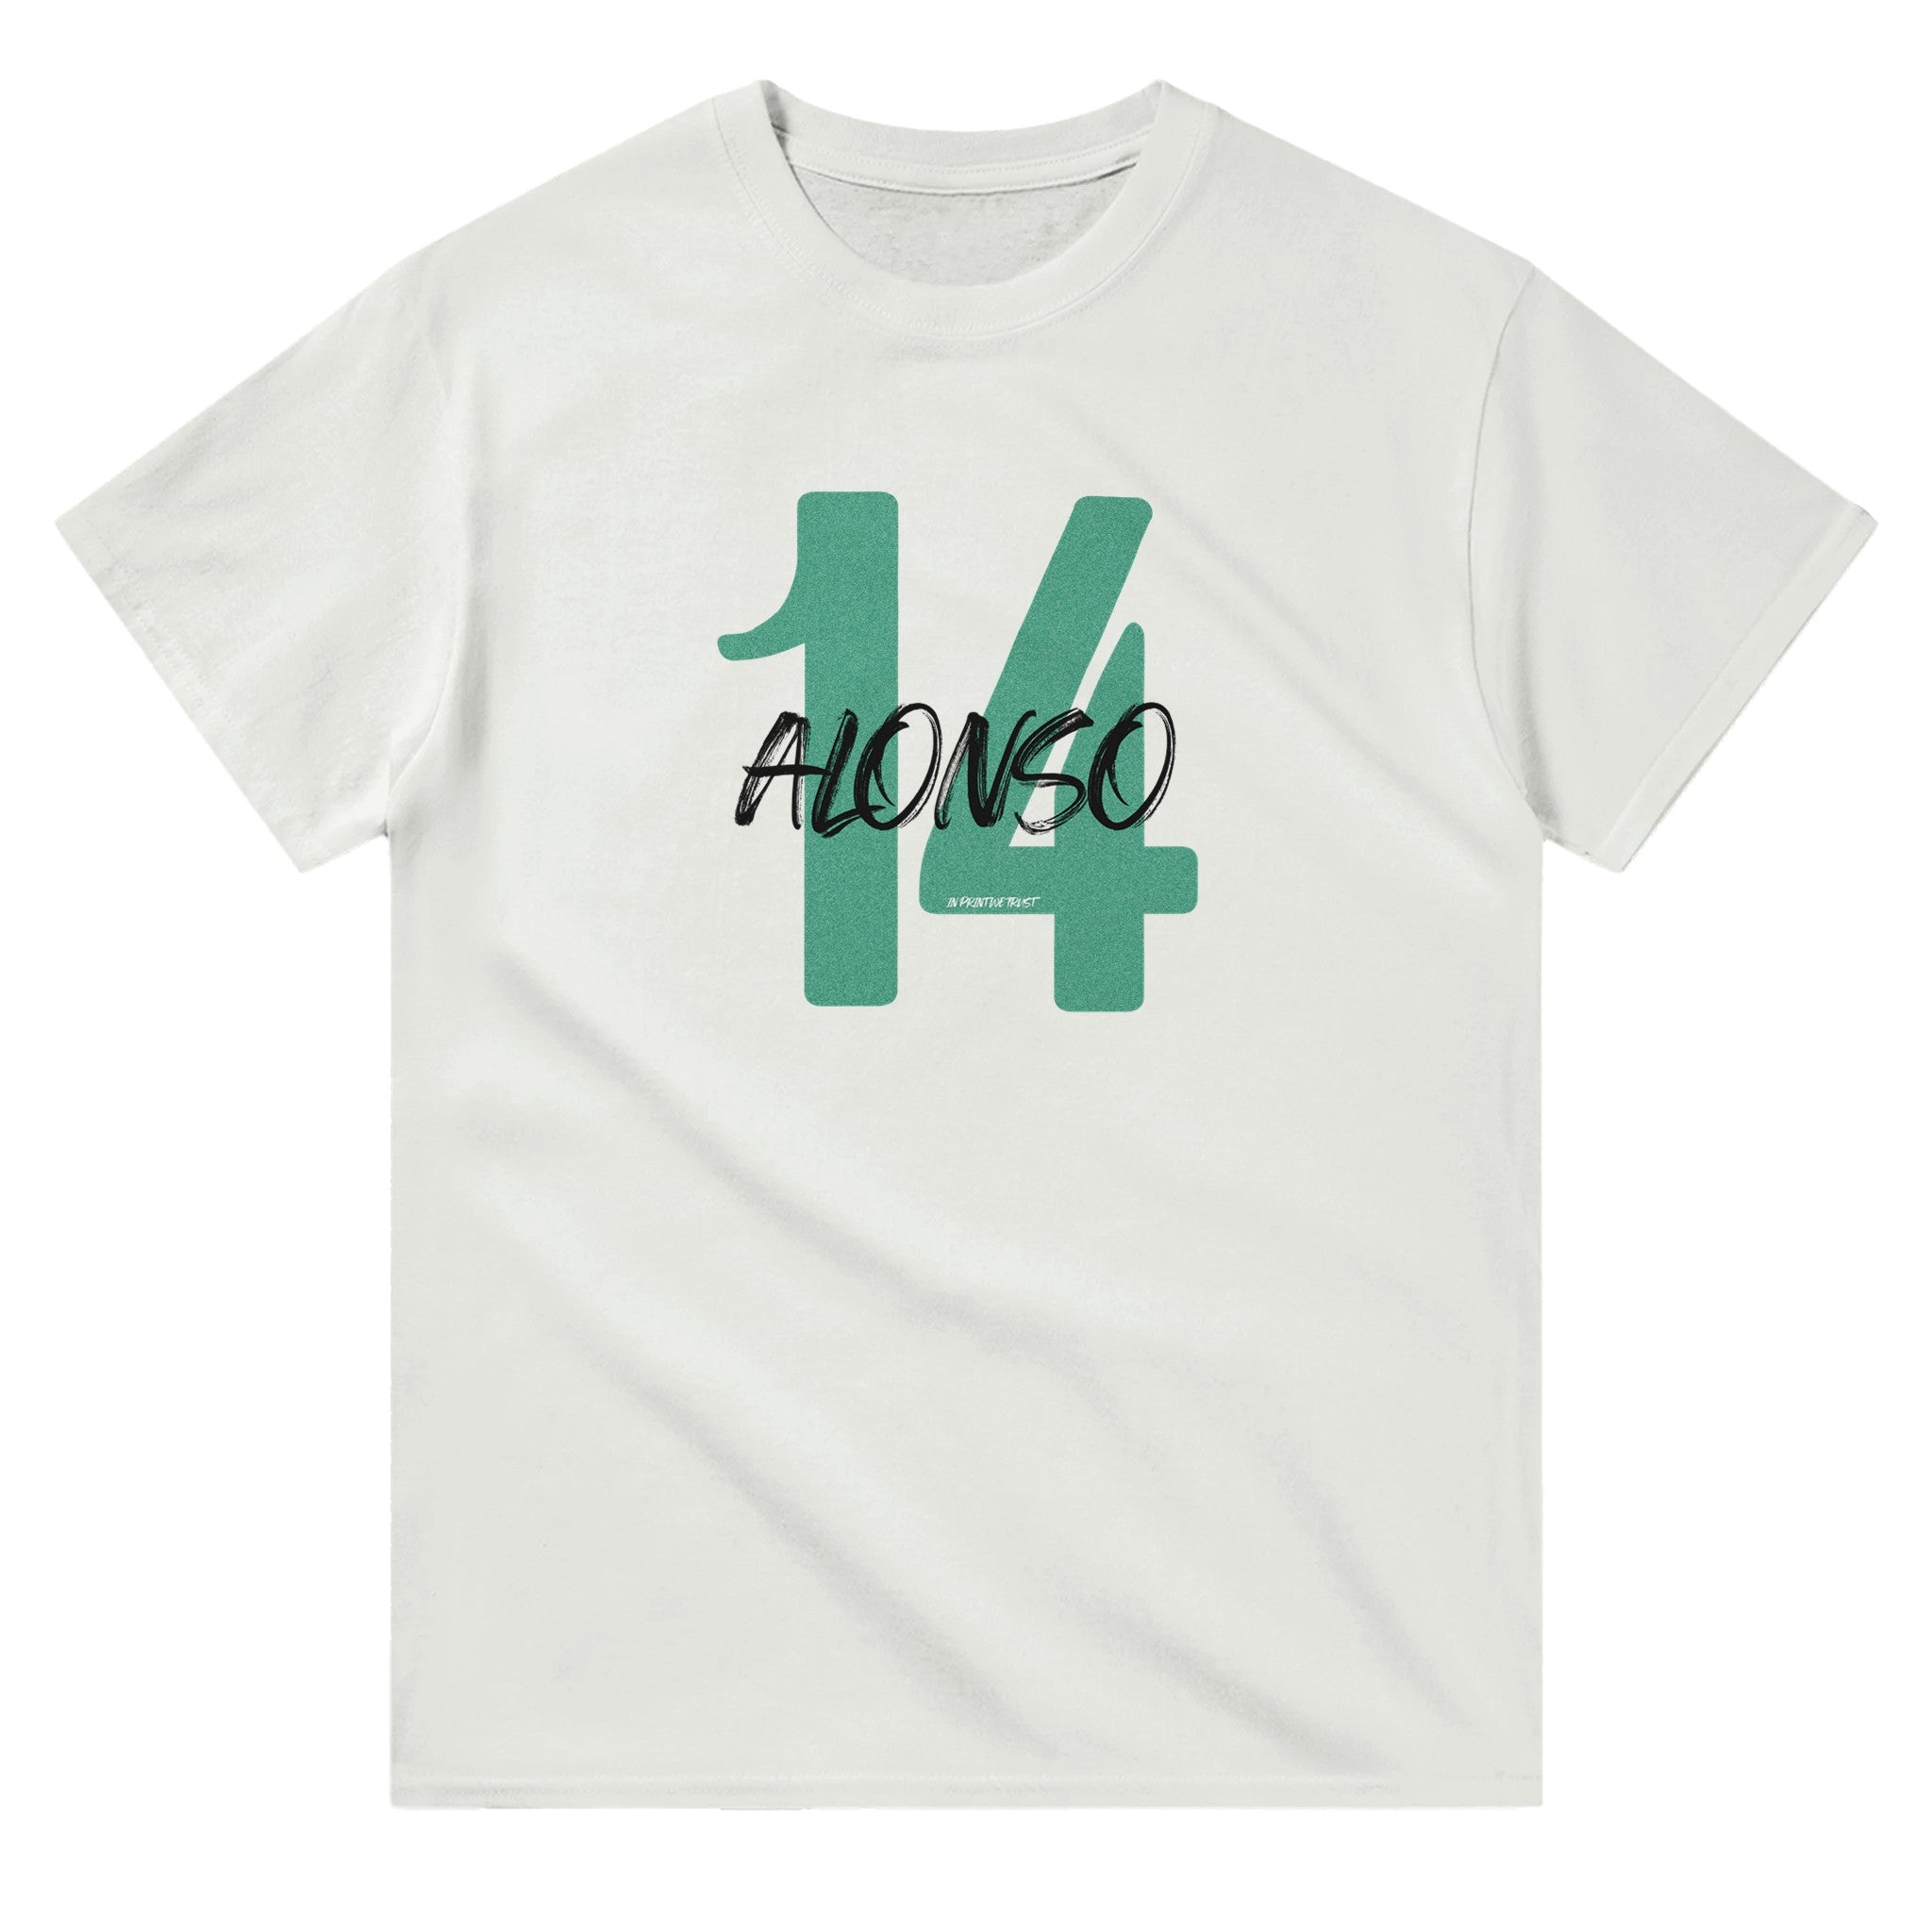 'Alonso 14' classic tee - In Print We Trust